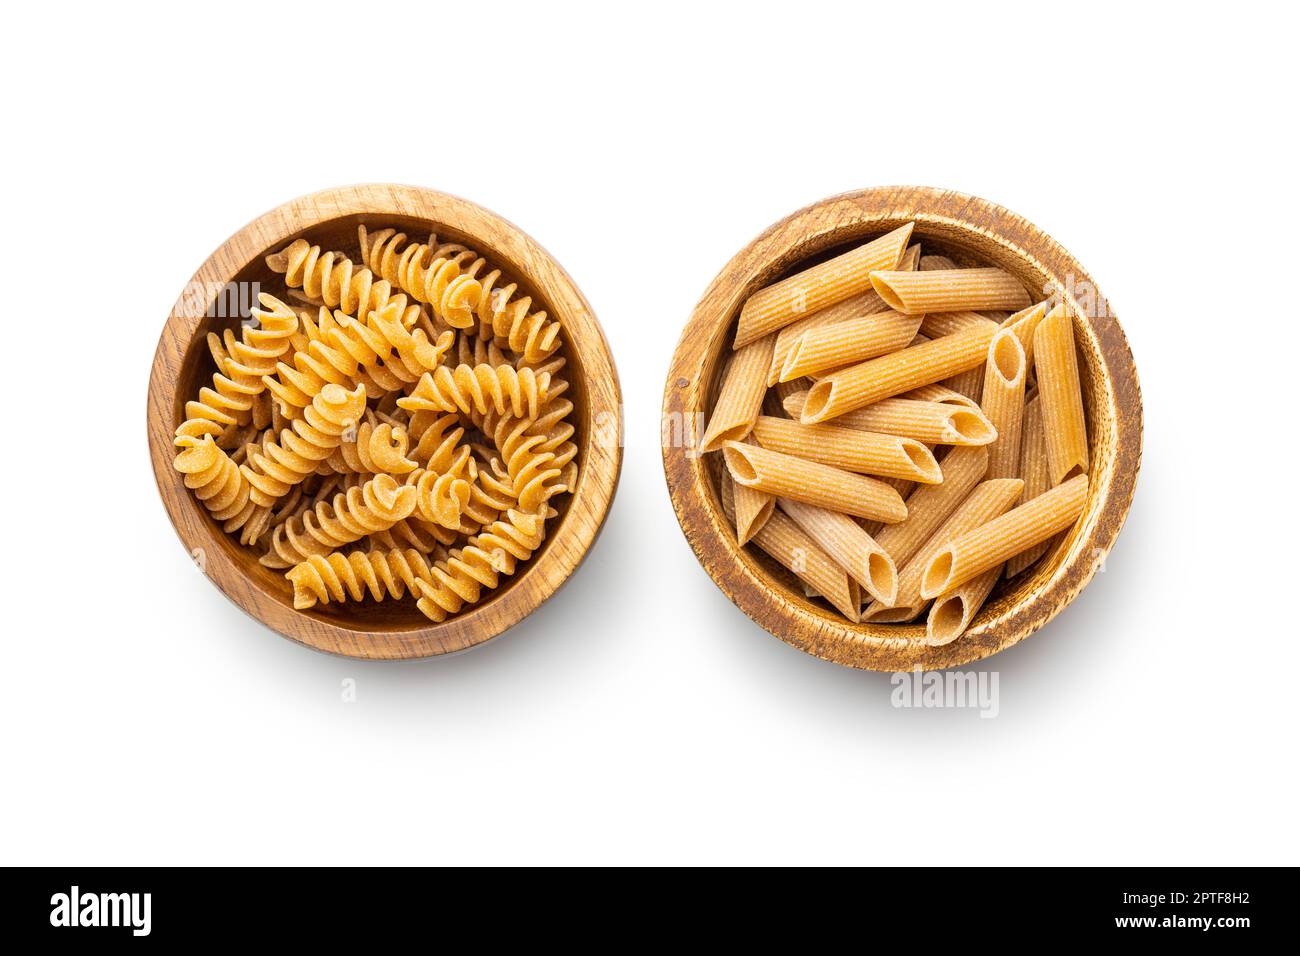 Uncooked whole grain pasta isolated on white background. Raw pasta in the bowl. Stock Photo